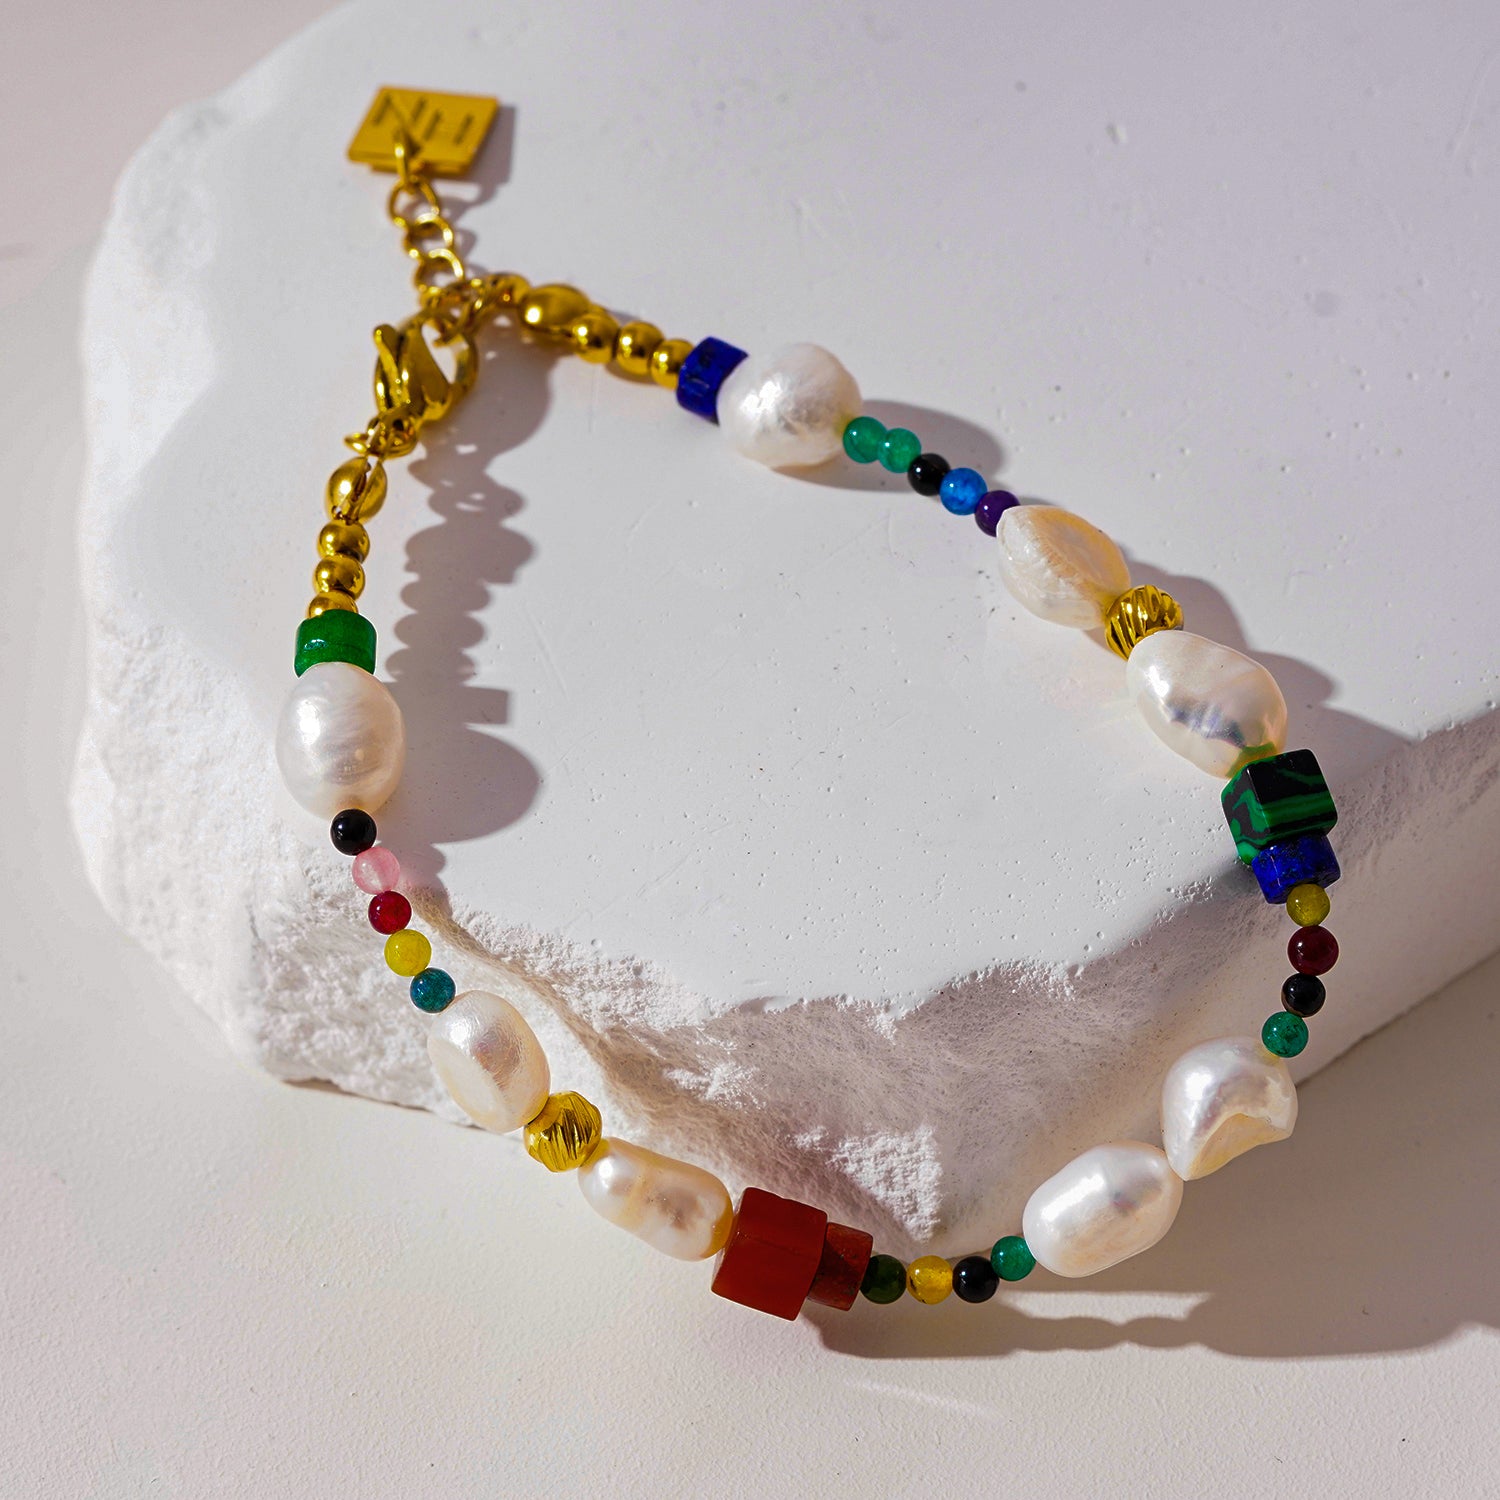 Style AMADIA 4663: Paradise Found - Colourful Bracelet with Gold Beads, Natural Stones, and Freshwater Pearls.